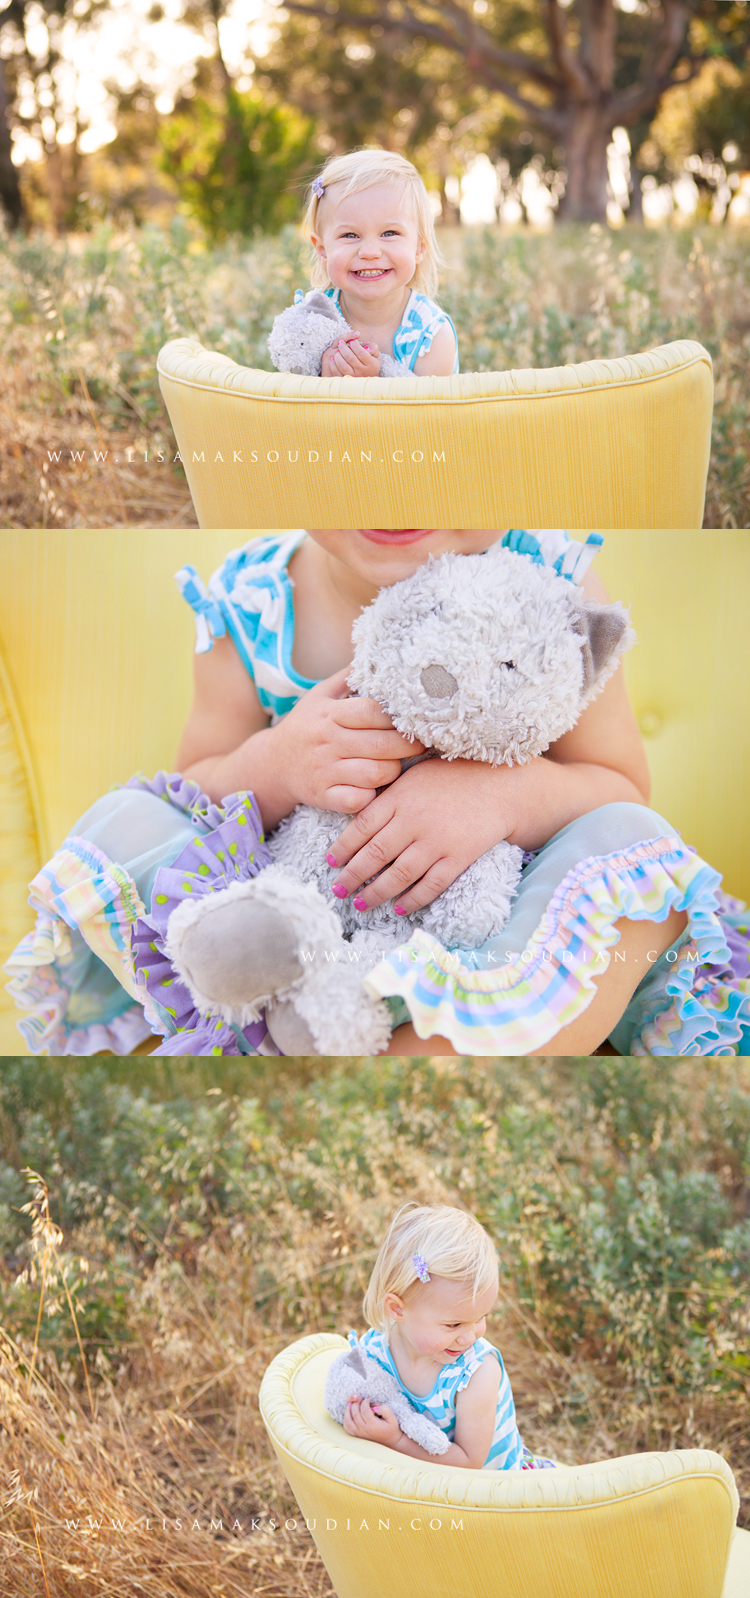 Baby photographer san luis obispo, california specializing in children's photography and modern kids portraits